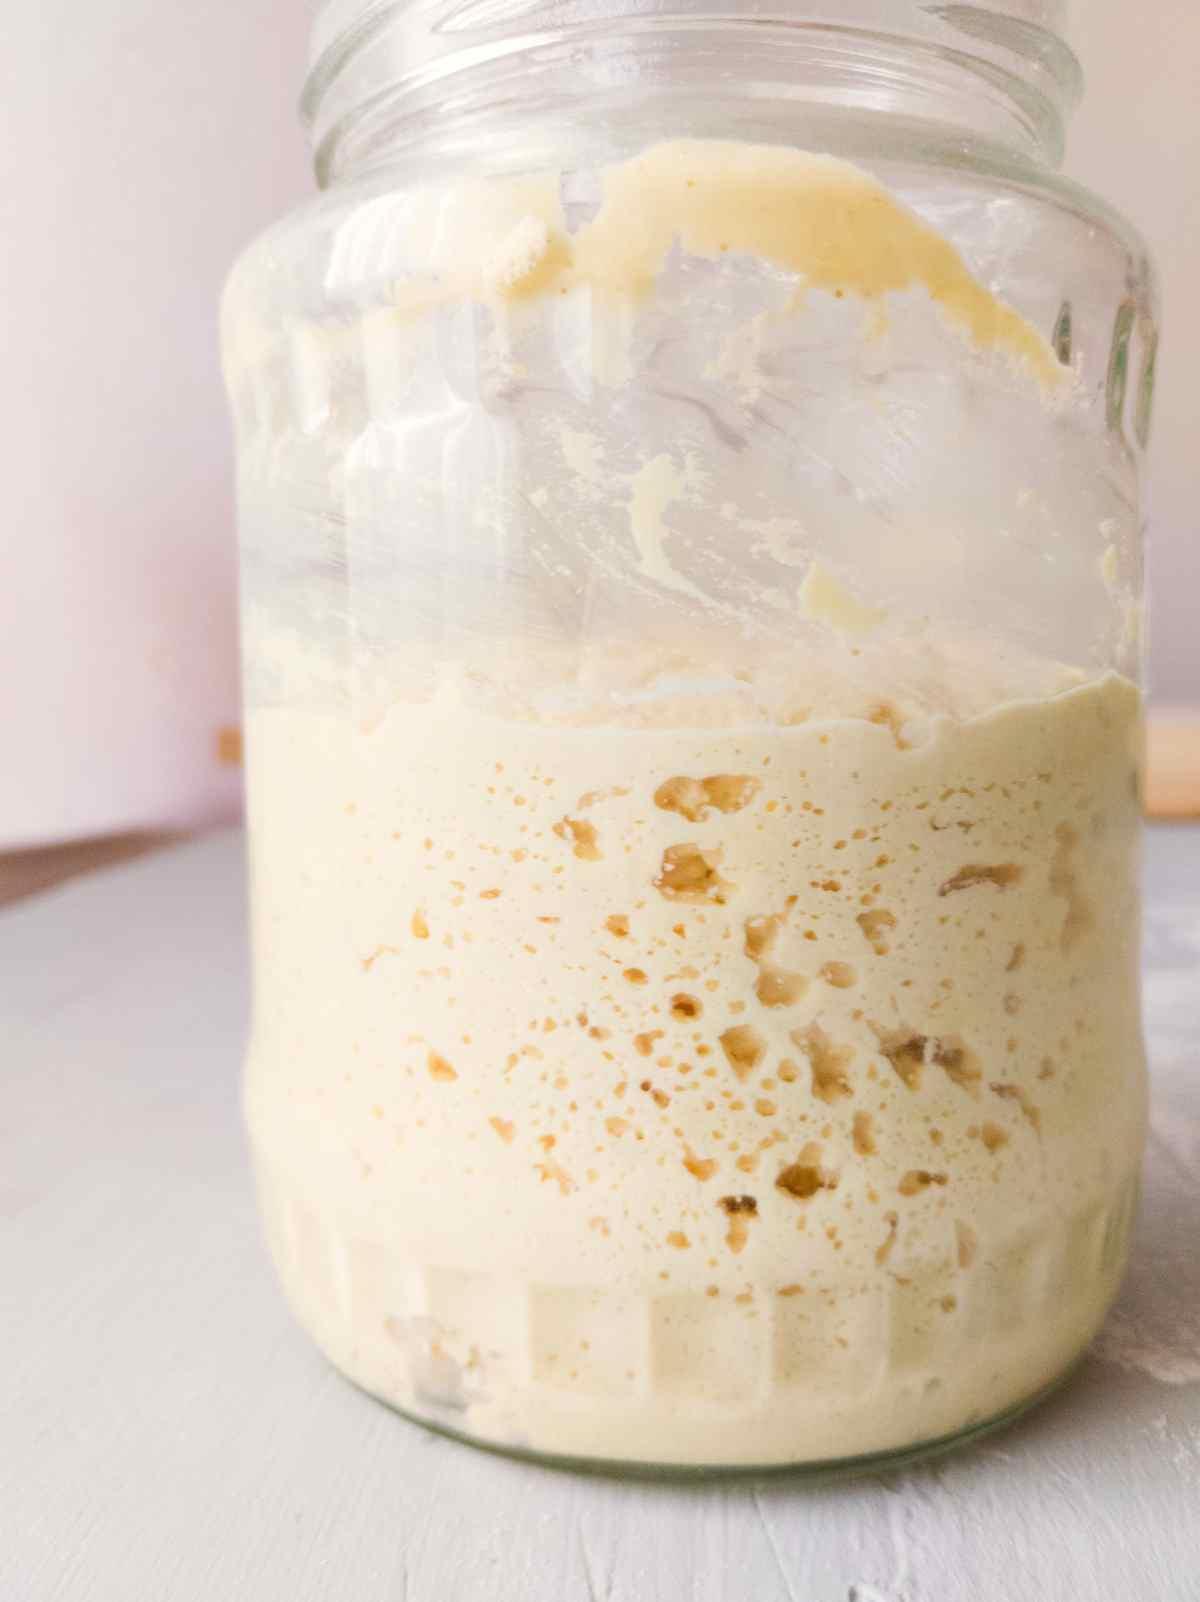 A glass jar with a millet sourdough starter in it.